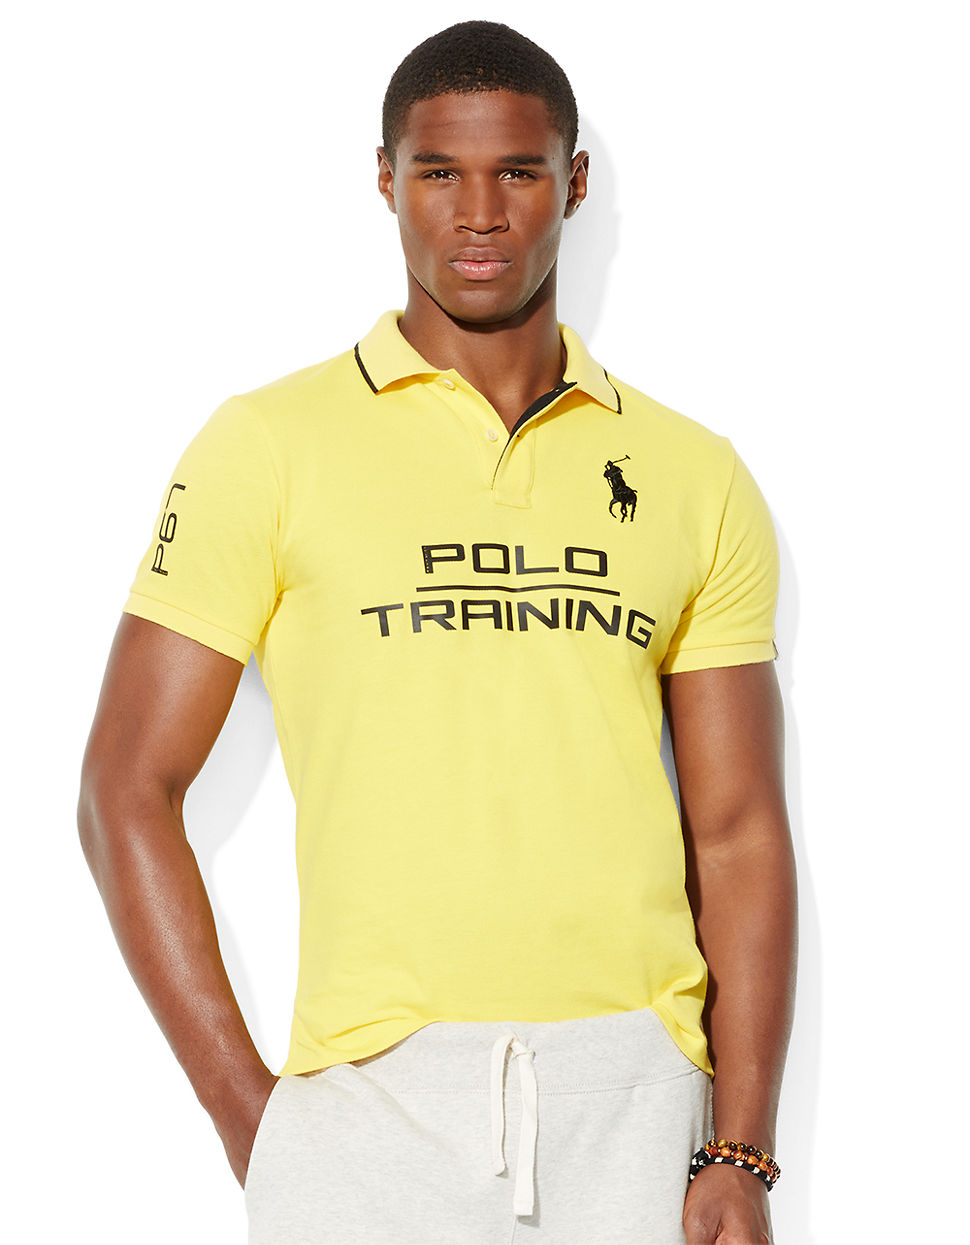 Lyst - Polo Ralph Lauren Performance Training Polo Shirt in Yellow for Men